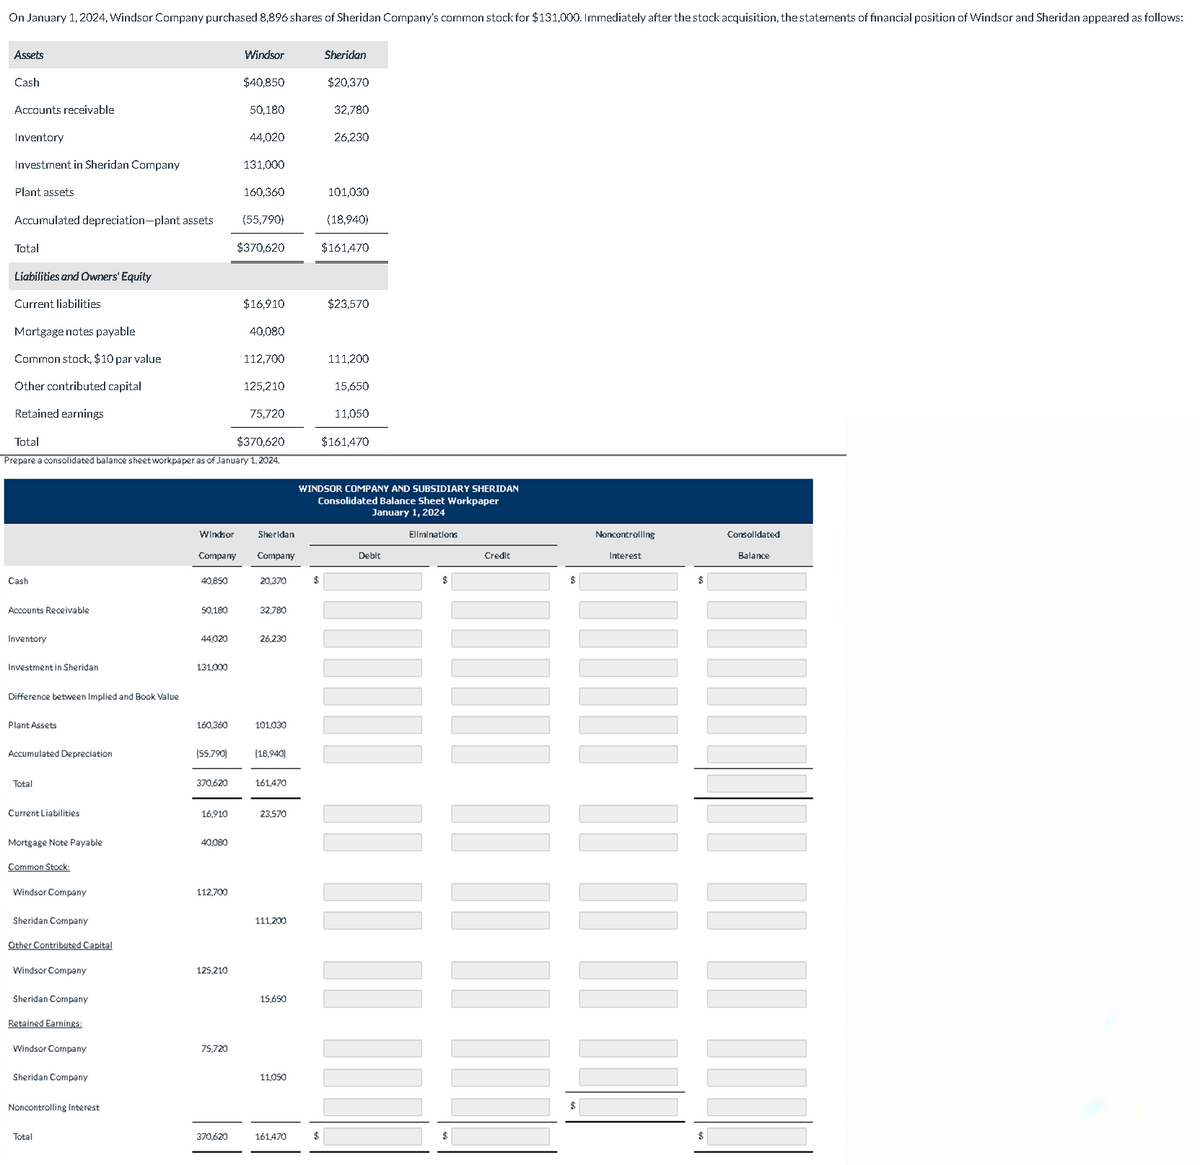 On January 1, 2024, Windsor Company purchased 8,896 shares of Sheridan Company's common stock for $131,000. Immediately after the stock acquisition, the statements of financial position of Windsor and Sheridan appeared as follows:
Assets
Windsor
Sheridan
Cash
$40,850
$20,370
Accounts receivable
50,180
32,780
Inventory
44,020
26,230
Investment in Sheridan Company
131,000
Plant assets
160,360
101,030
Accumulated depreciation-plant assets
(55,790)
(18,940)
Total
$370,620
$161,470
Liabilities and Owners' Equity
Current liabilities
$16,910
$23,570
Mortgage notes payable
40,080
Common stock, $10 par value
112,700
111,200
Other contributed capital
125,210
15,650
Retained earnings
75,720
11,050
Total
$370,620
$161,470
Prepare a consolidated balance sheet workpaper as of January 1, 2024.
Cash
WINDSOR COMPANY AND SUBSIDIARY SHERIDAN
Consolidated Balance Sheet Workpaper
January 1, 2024
Windsor
Sheridan
Eliminations
Noncontrolling
Consolidated
Company Company
Debit
Credit
Interest
Balance
40.850
20,370
$
$
Accounts Receivable
50,160
32,760
Inventory
Investment in Sheridan
Difference between Implied and Book Value
Plant Assets
Accumulated Depreciation
Total
Current Liabilities
44020
26,230
131,000
160,360
101,030
(55,790)
(18,940)
370,620
161,470
16,910
23,570
Mortgage Note Payable
40,080
Common Stock:
Windsor Company
112,700
Sheridan Company
Other Contributed Capital
Windsor Company
125,210
Sheridan Company
Retained Earnings:
Windsor Company
75.720
Sheridan Company
Noncontrolling Interest
Total
111,200
15,650
11,050
370,620
161,470
$
$
$